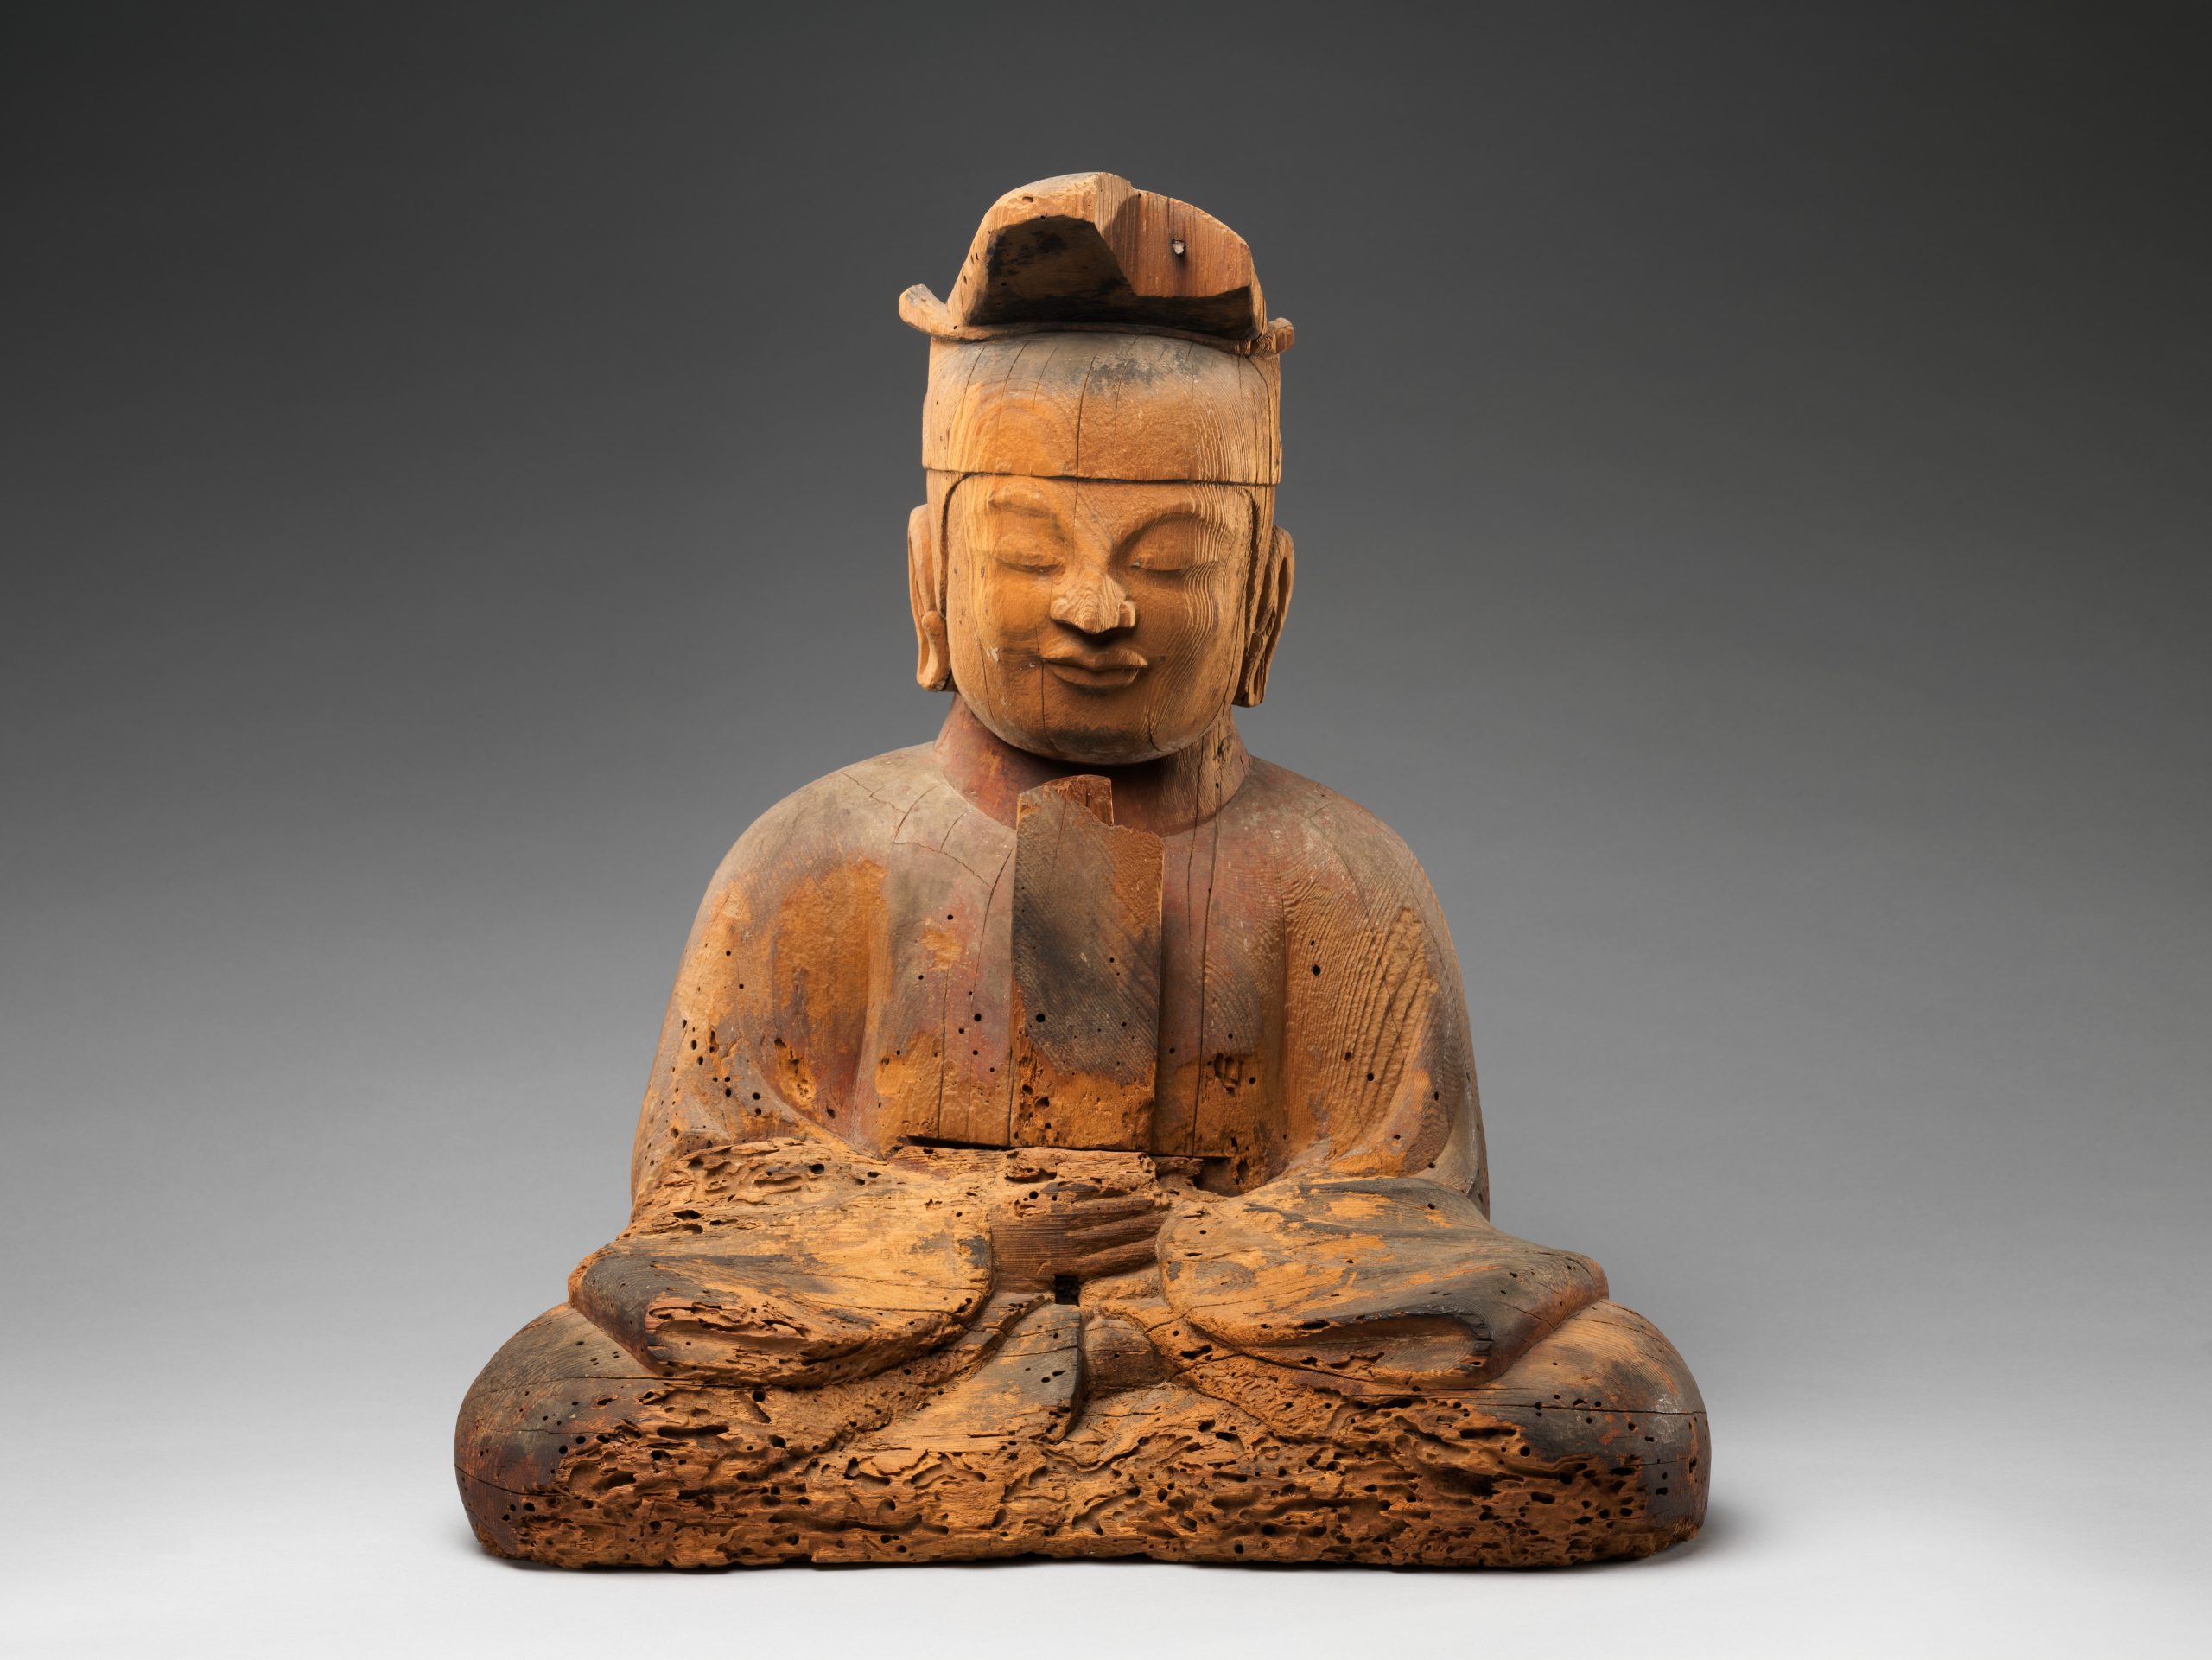 A photograph of a sculpture of a buddha from 10th century Japan.